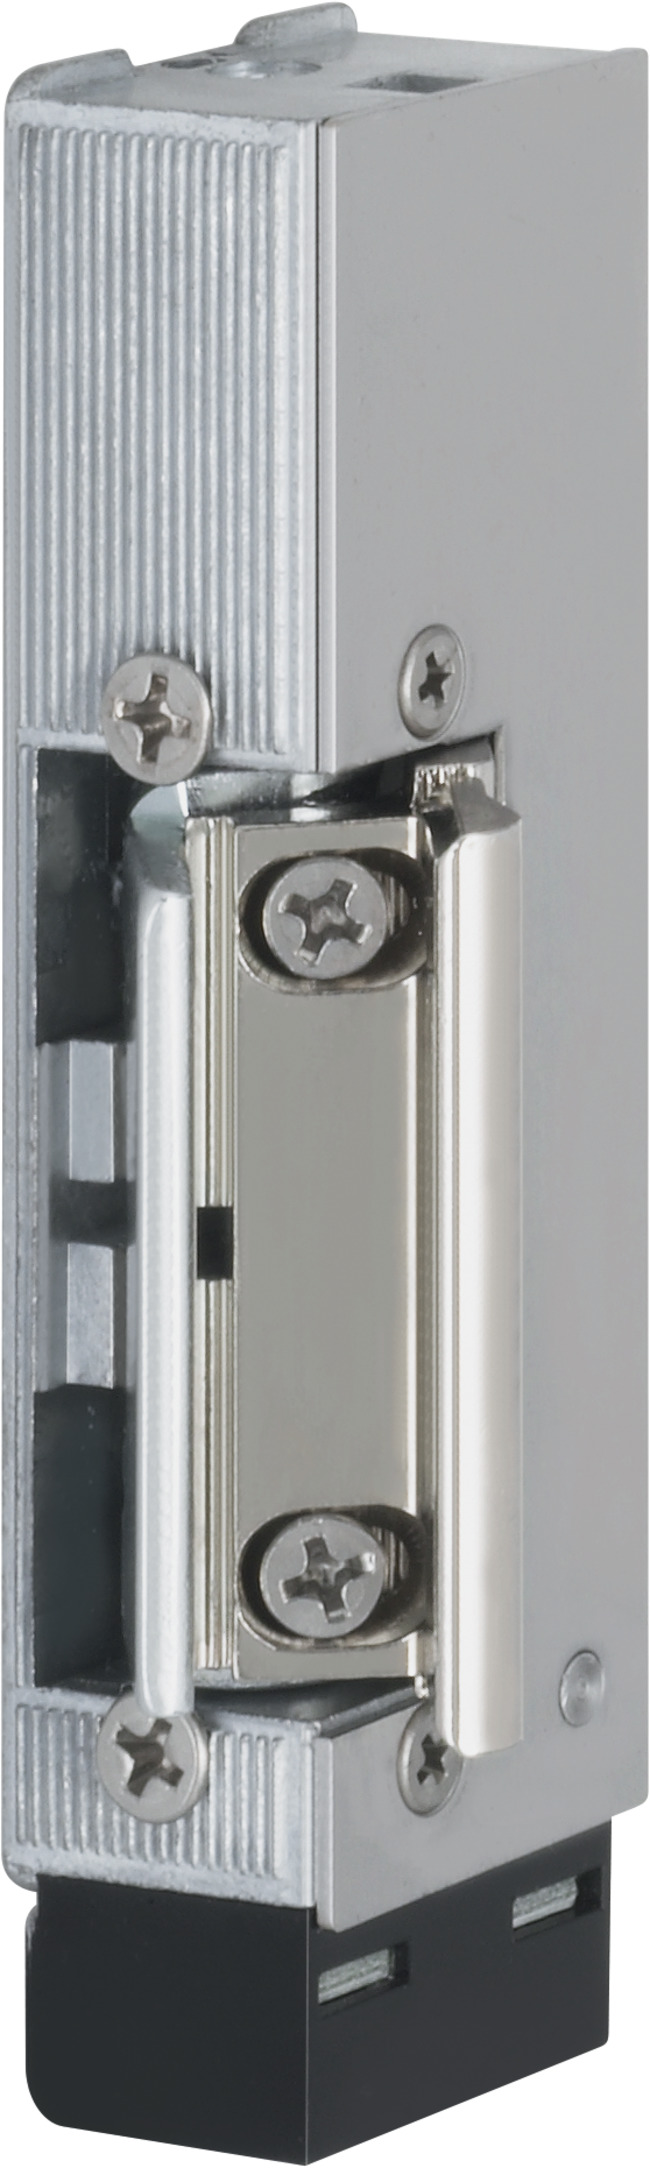 934: Surface mount lightweight door lock and stainless cover